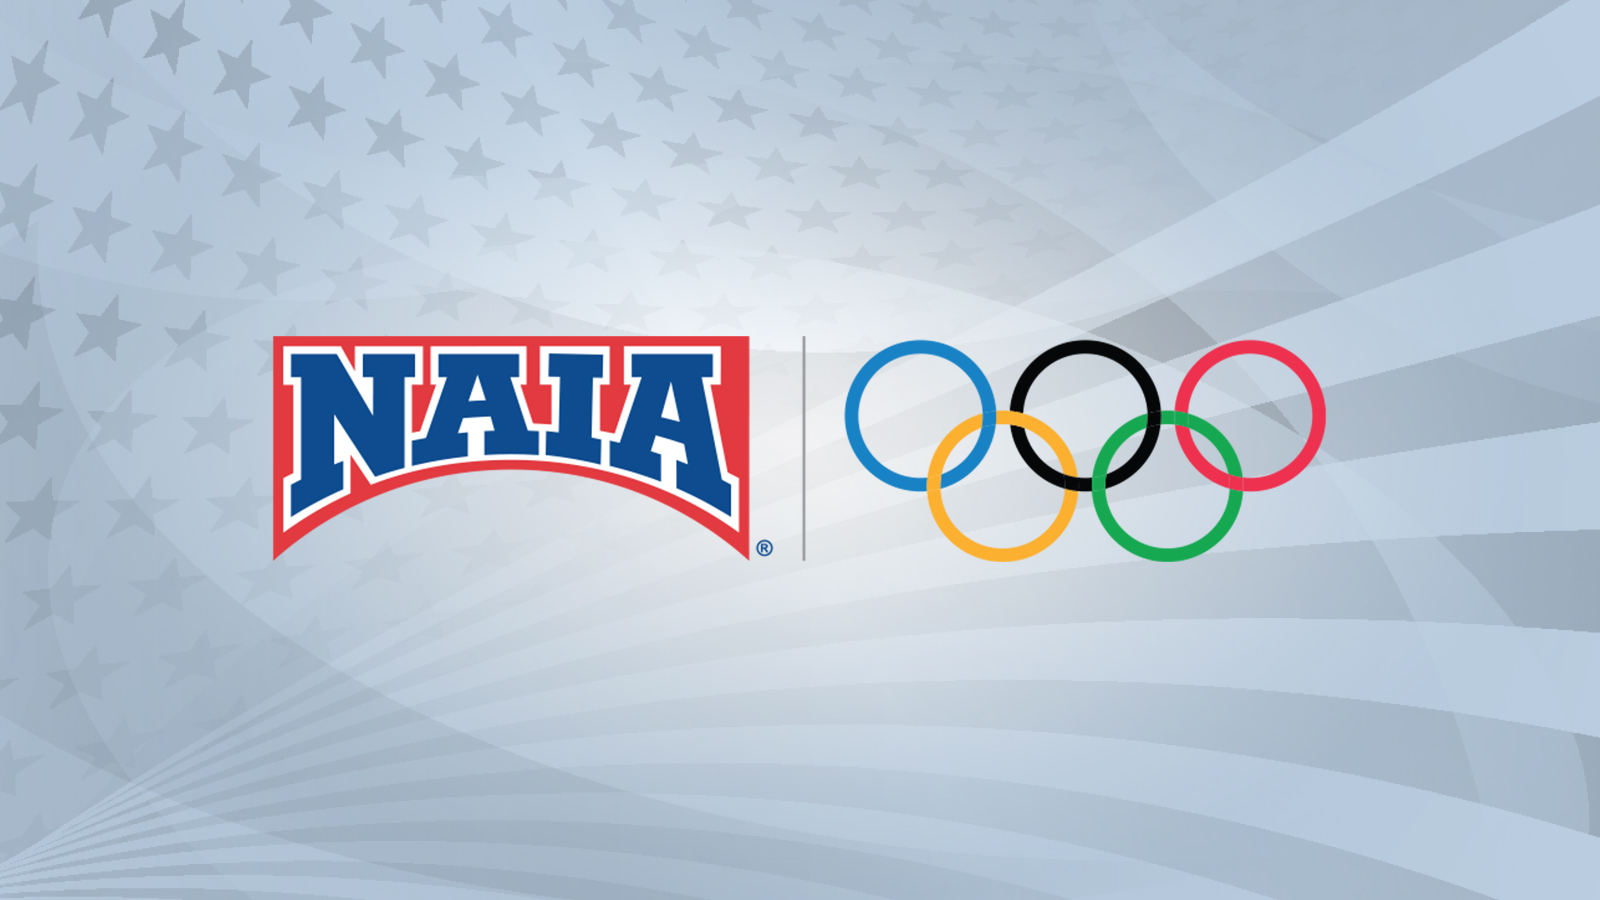 NAIA Members Participating in the 2020 Olympics